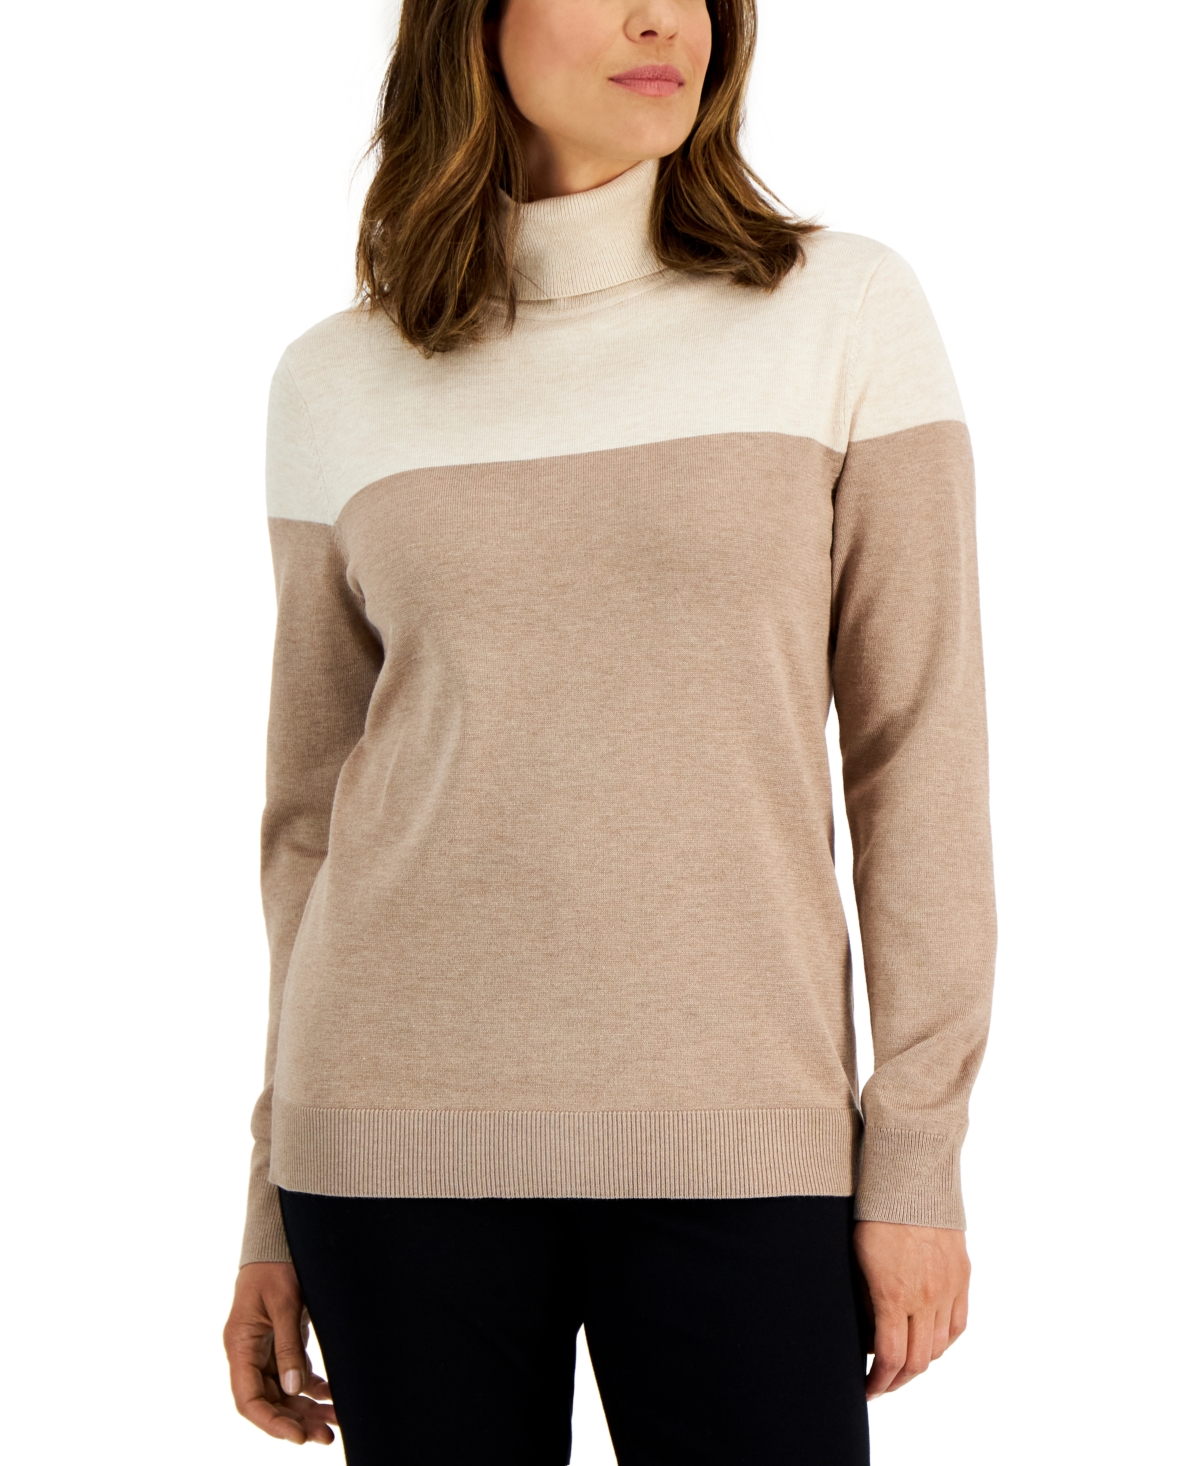 Women's Colorblocked Turtleneck Sweater, Created for Macy's - Chestnut Heather Combo